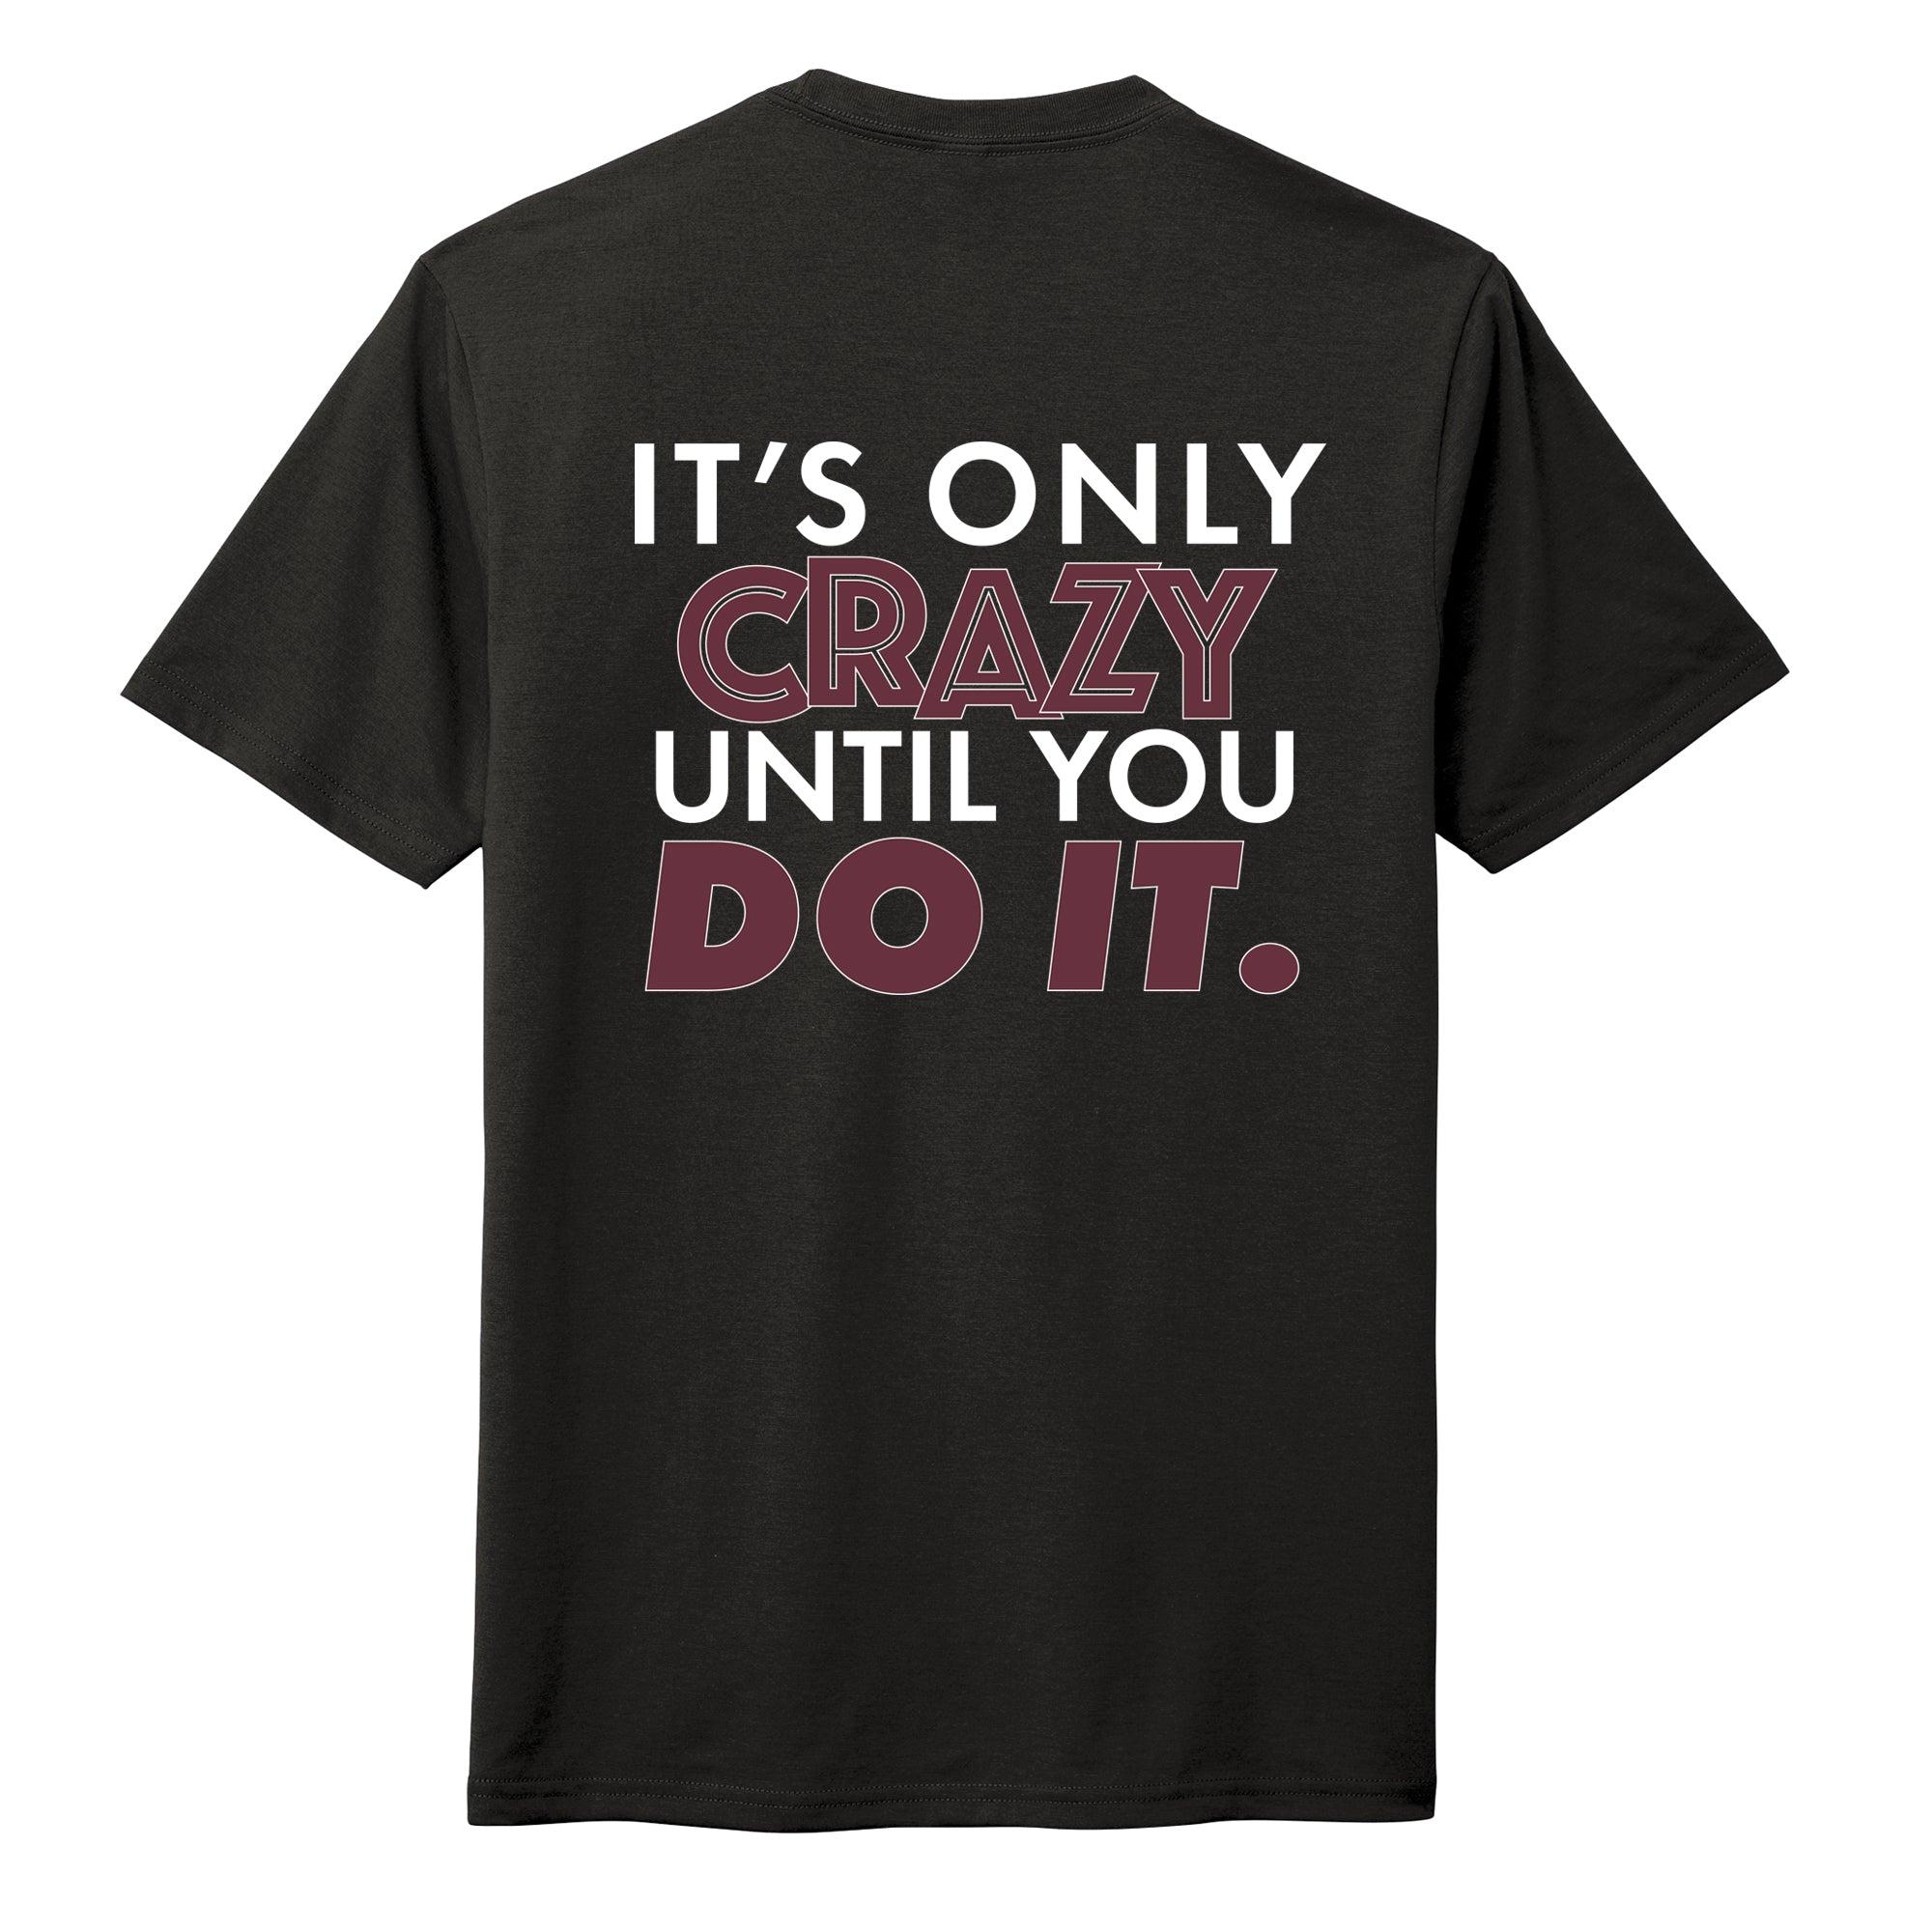 "Its Only Crazy Till You Do It" T-Shirt- Benefitting the US Olympic and Paralympic Foundation